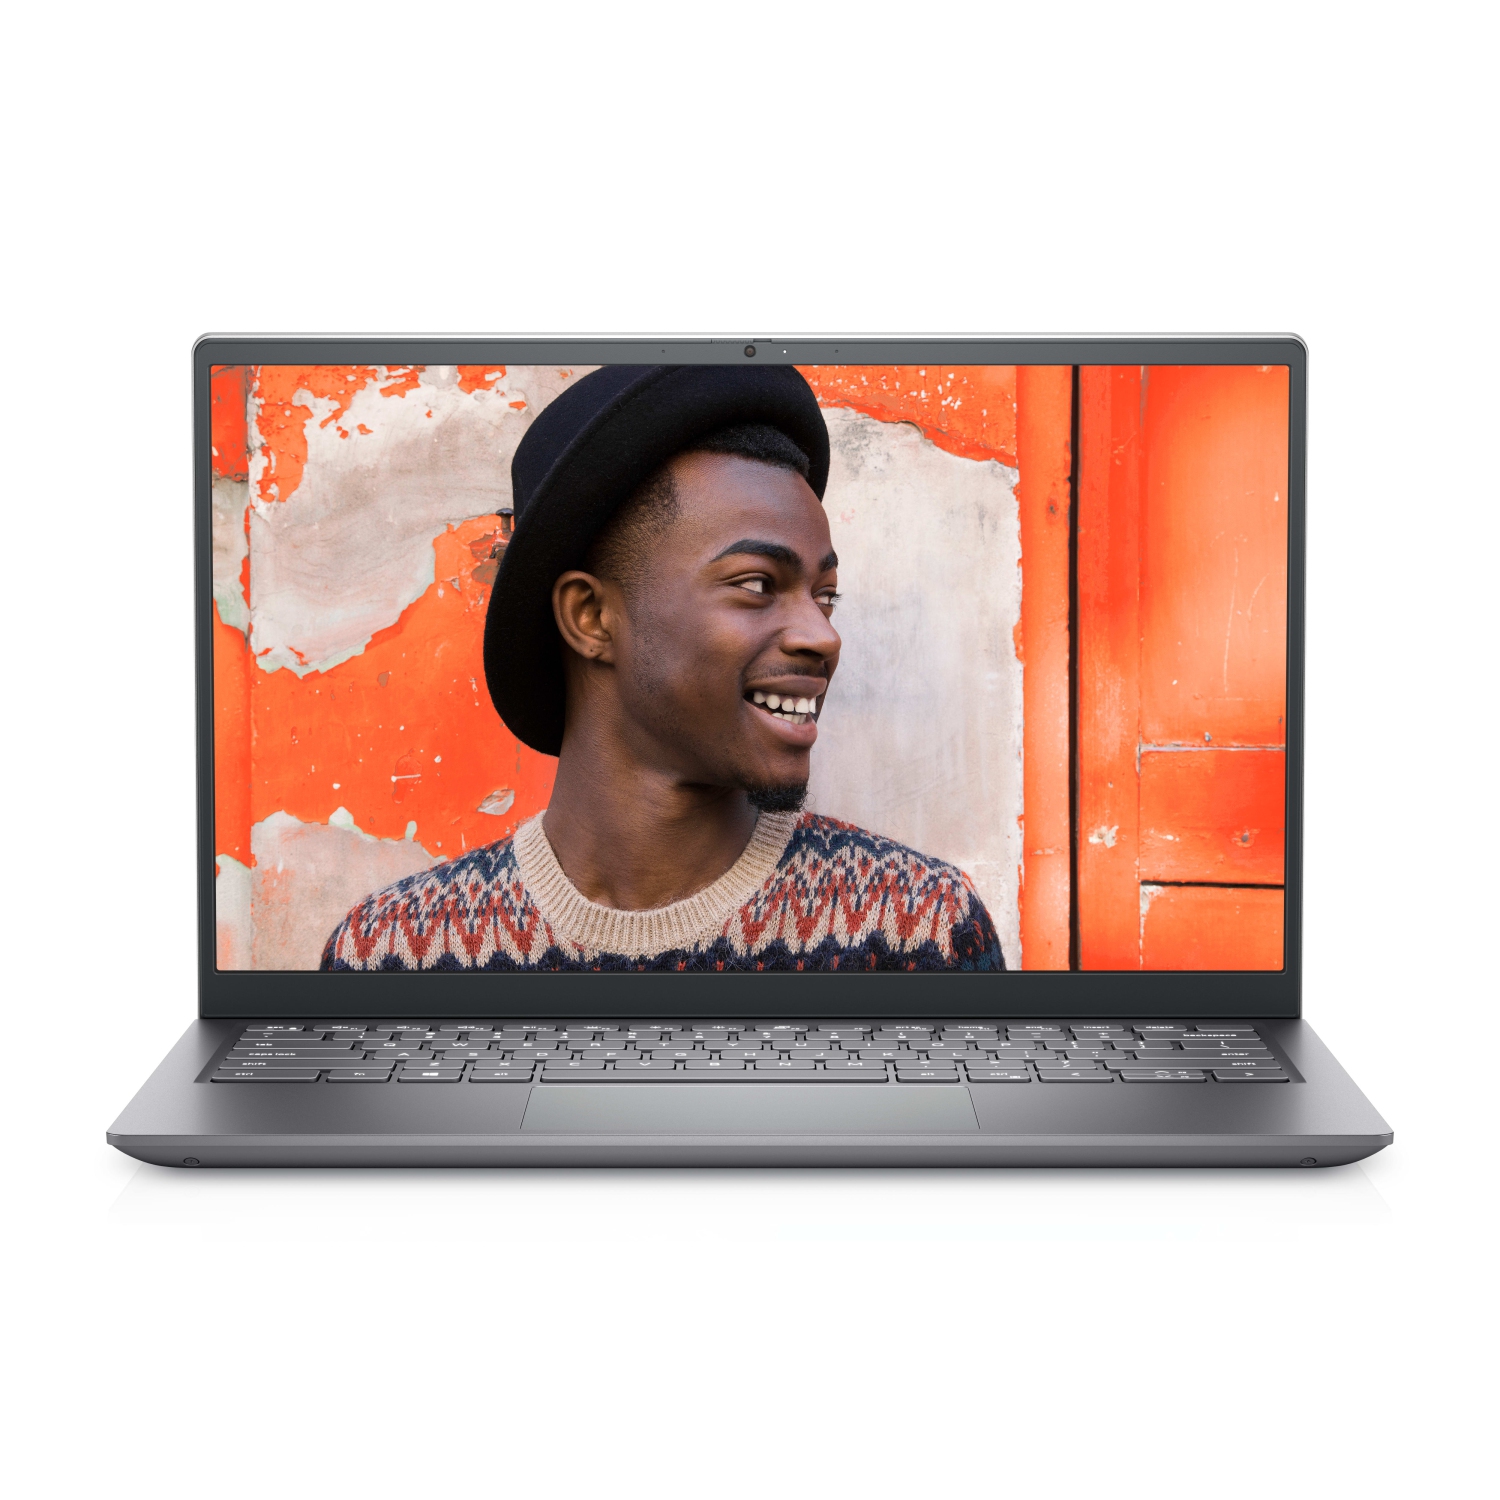 Refurbished (Excellent) – Dell Inspiron 5410 Laptop (2021) | 14" FHD | Core i7 - 256GB SSD - 12GB RAM | 4 Cores @ 4.8 GHz - 11th Gen CPU